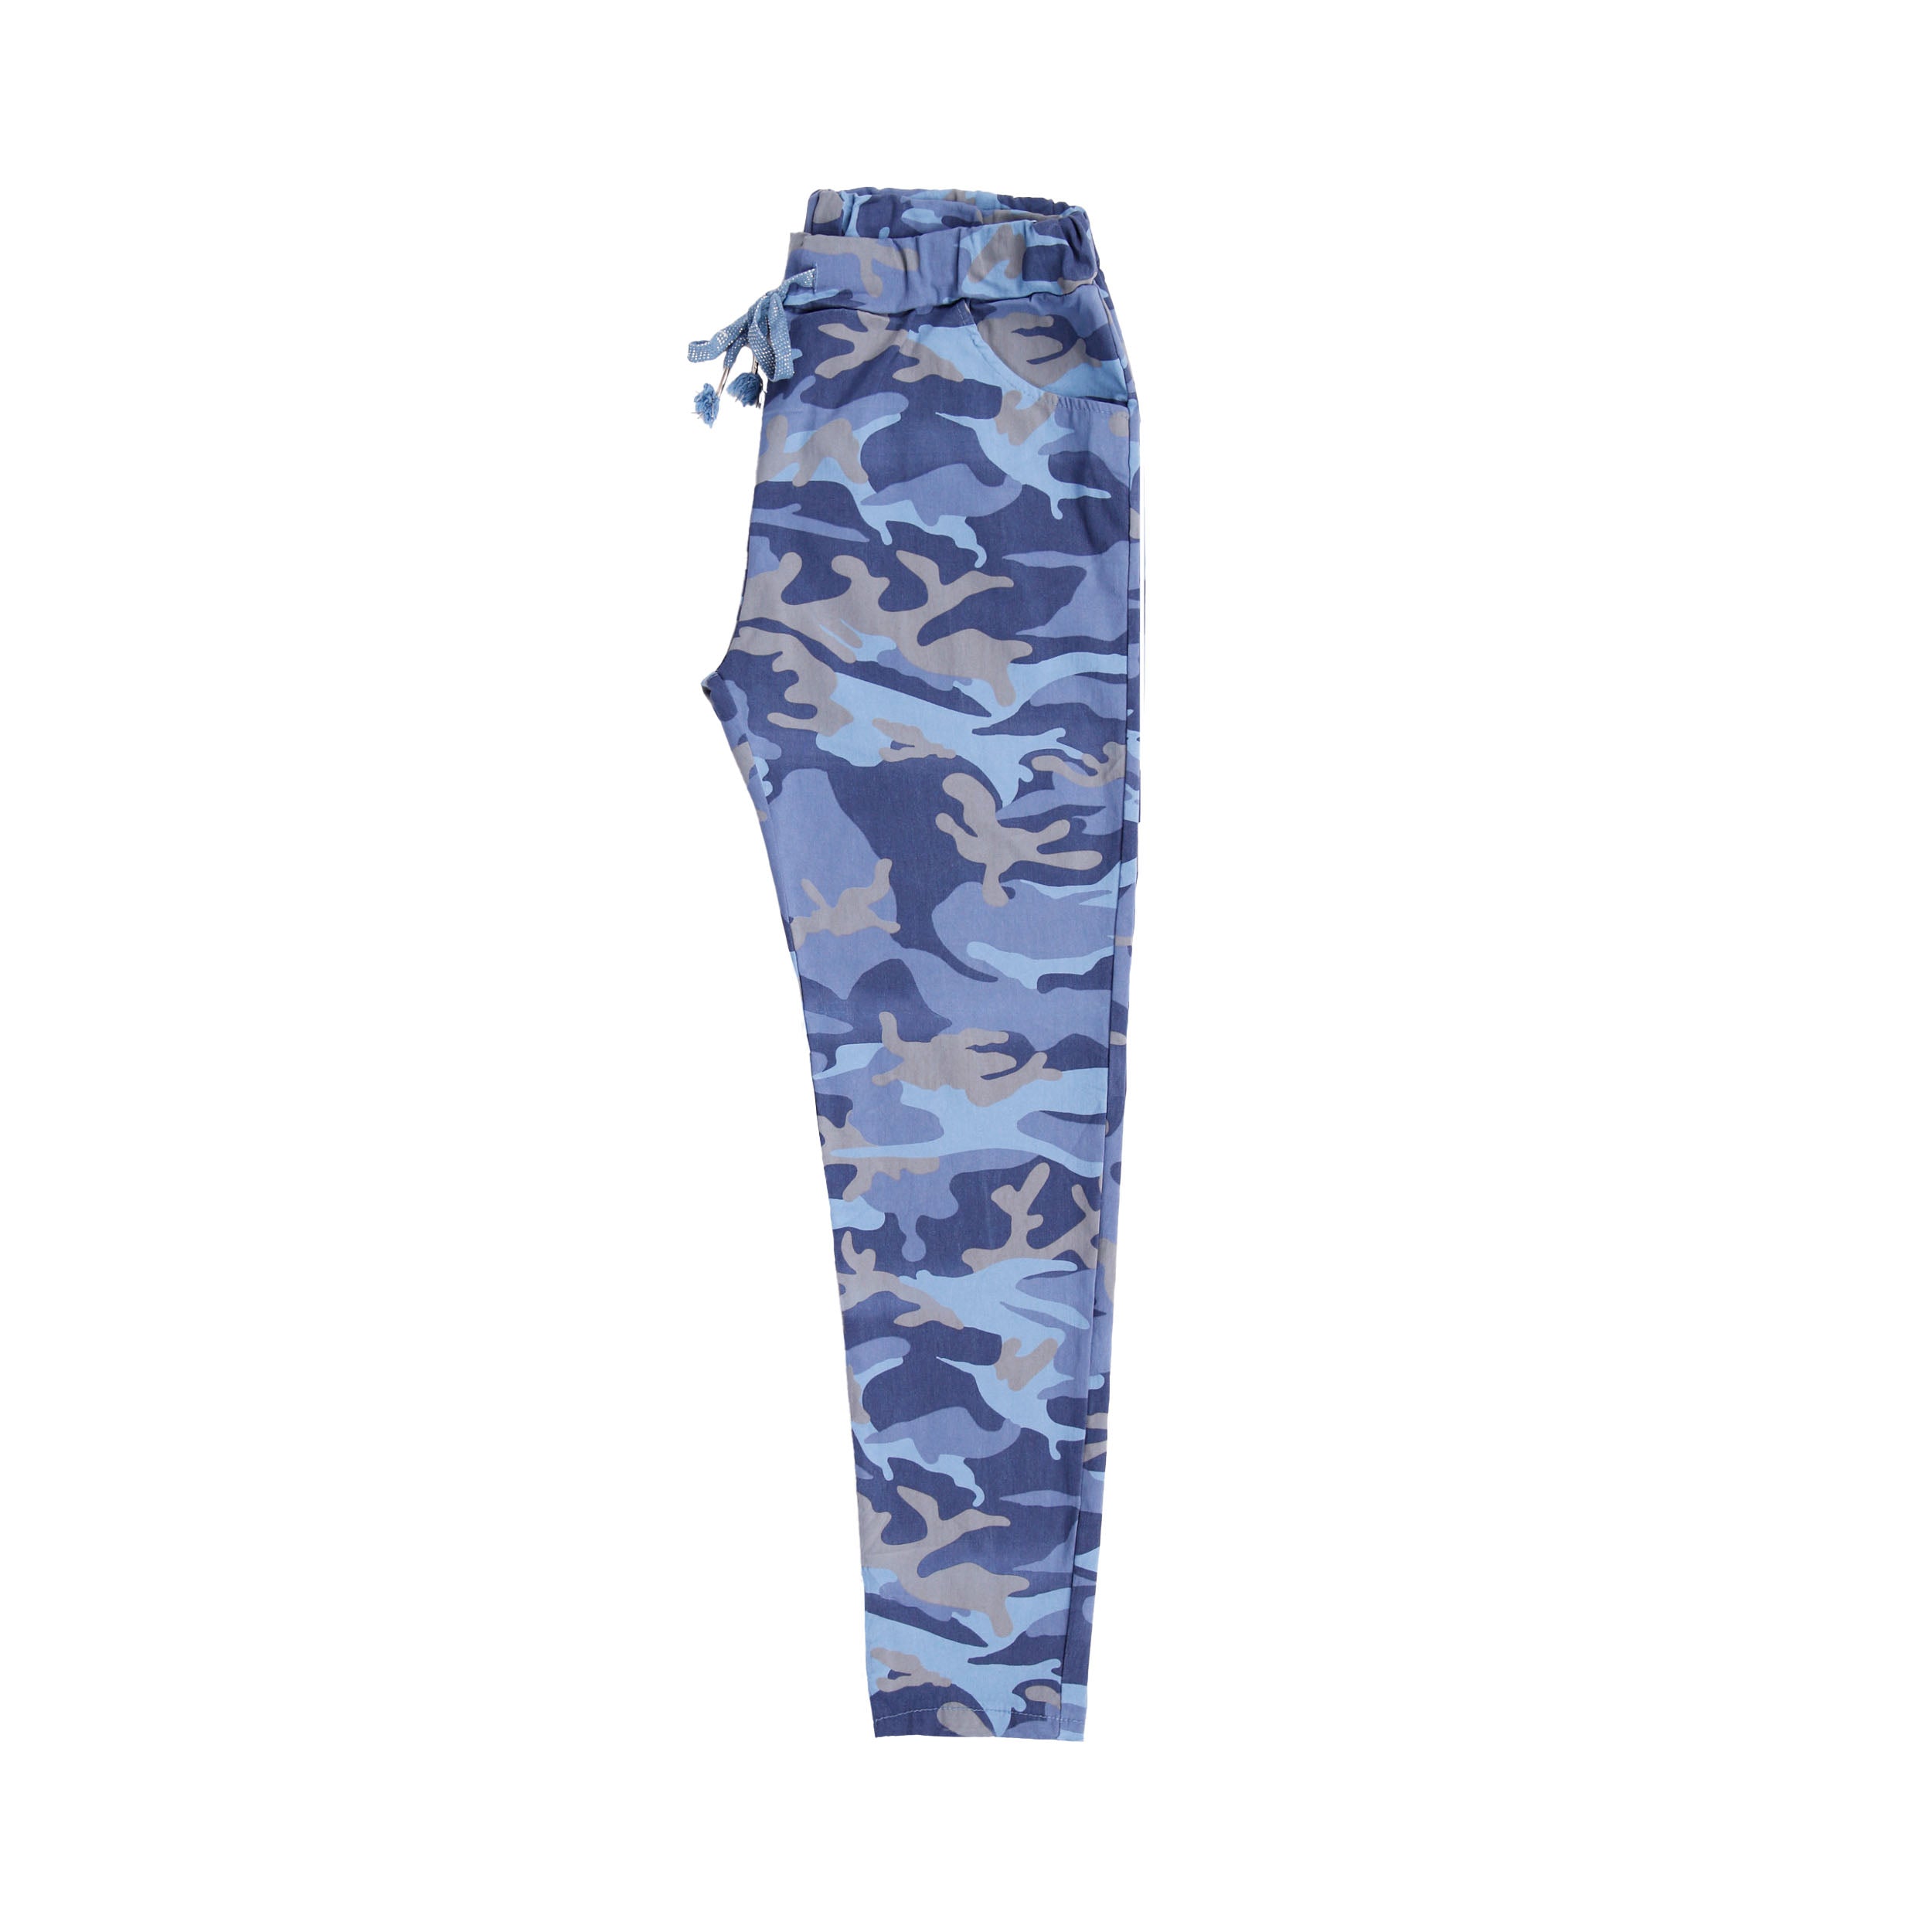 High Waist Camouflage Cargo Pants With Straight Pockets For Women  Fashionable Streetwear Camouflage Trousers Women With Camo Leaf Print Style  230407 From Xuan04, $24.5 | DHgate.Com